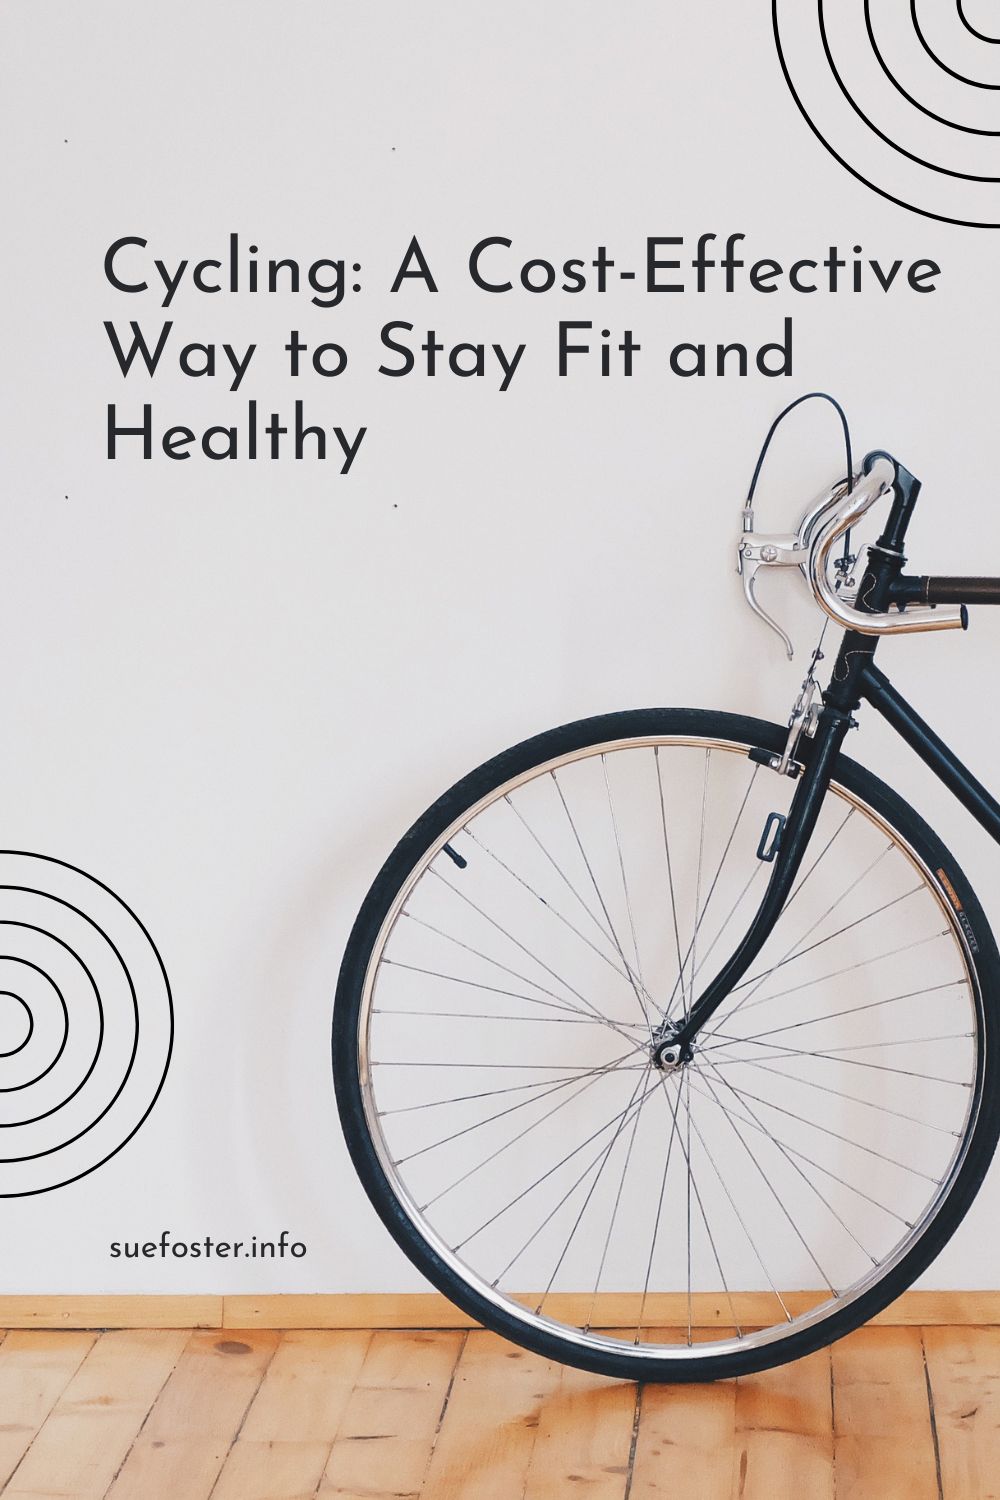 Experience the joy of cycling for fitness and savings! Explore safe routes, find affordable gear, and stay focused with this guide. Happy cycling!